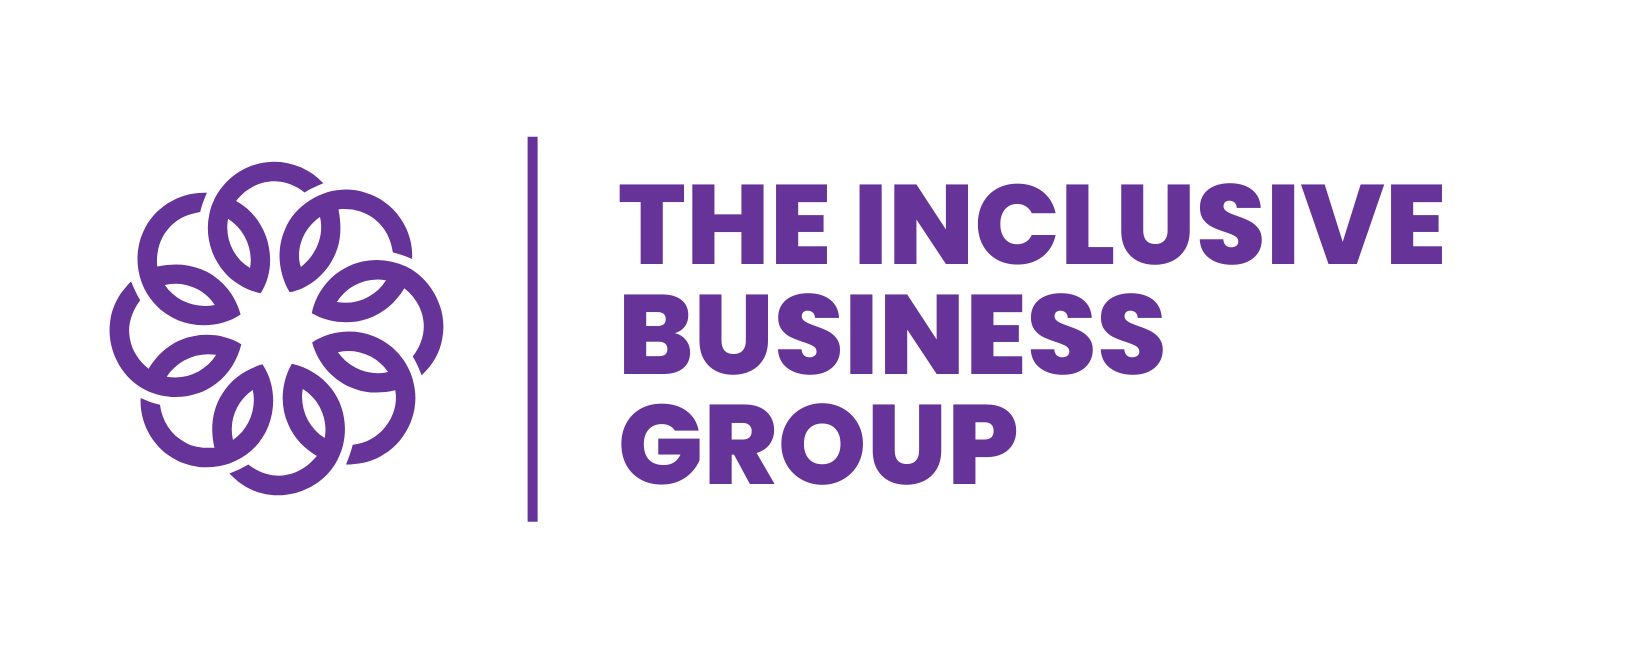 Text image: The Inclusive Business Group with circular pattern logo to the left of text. Text in purple on white background.